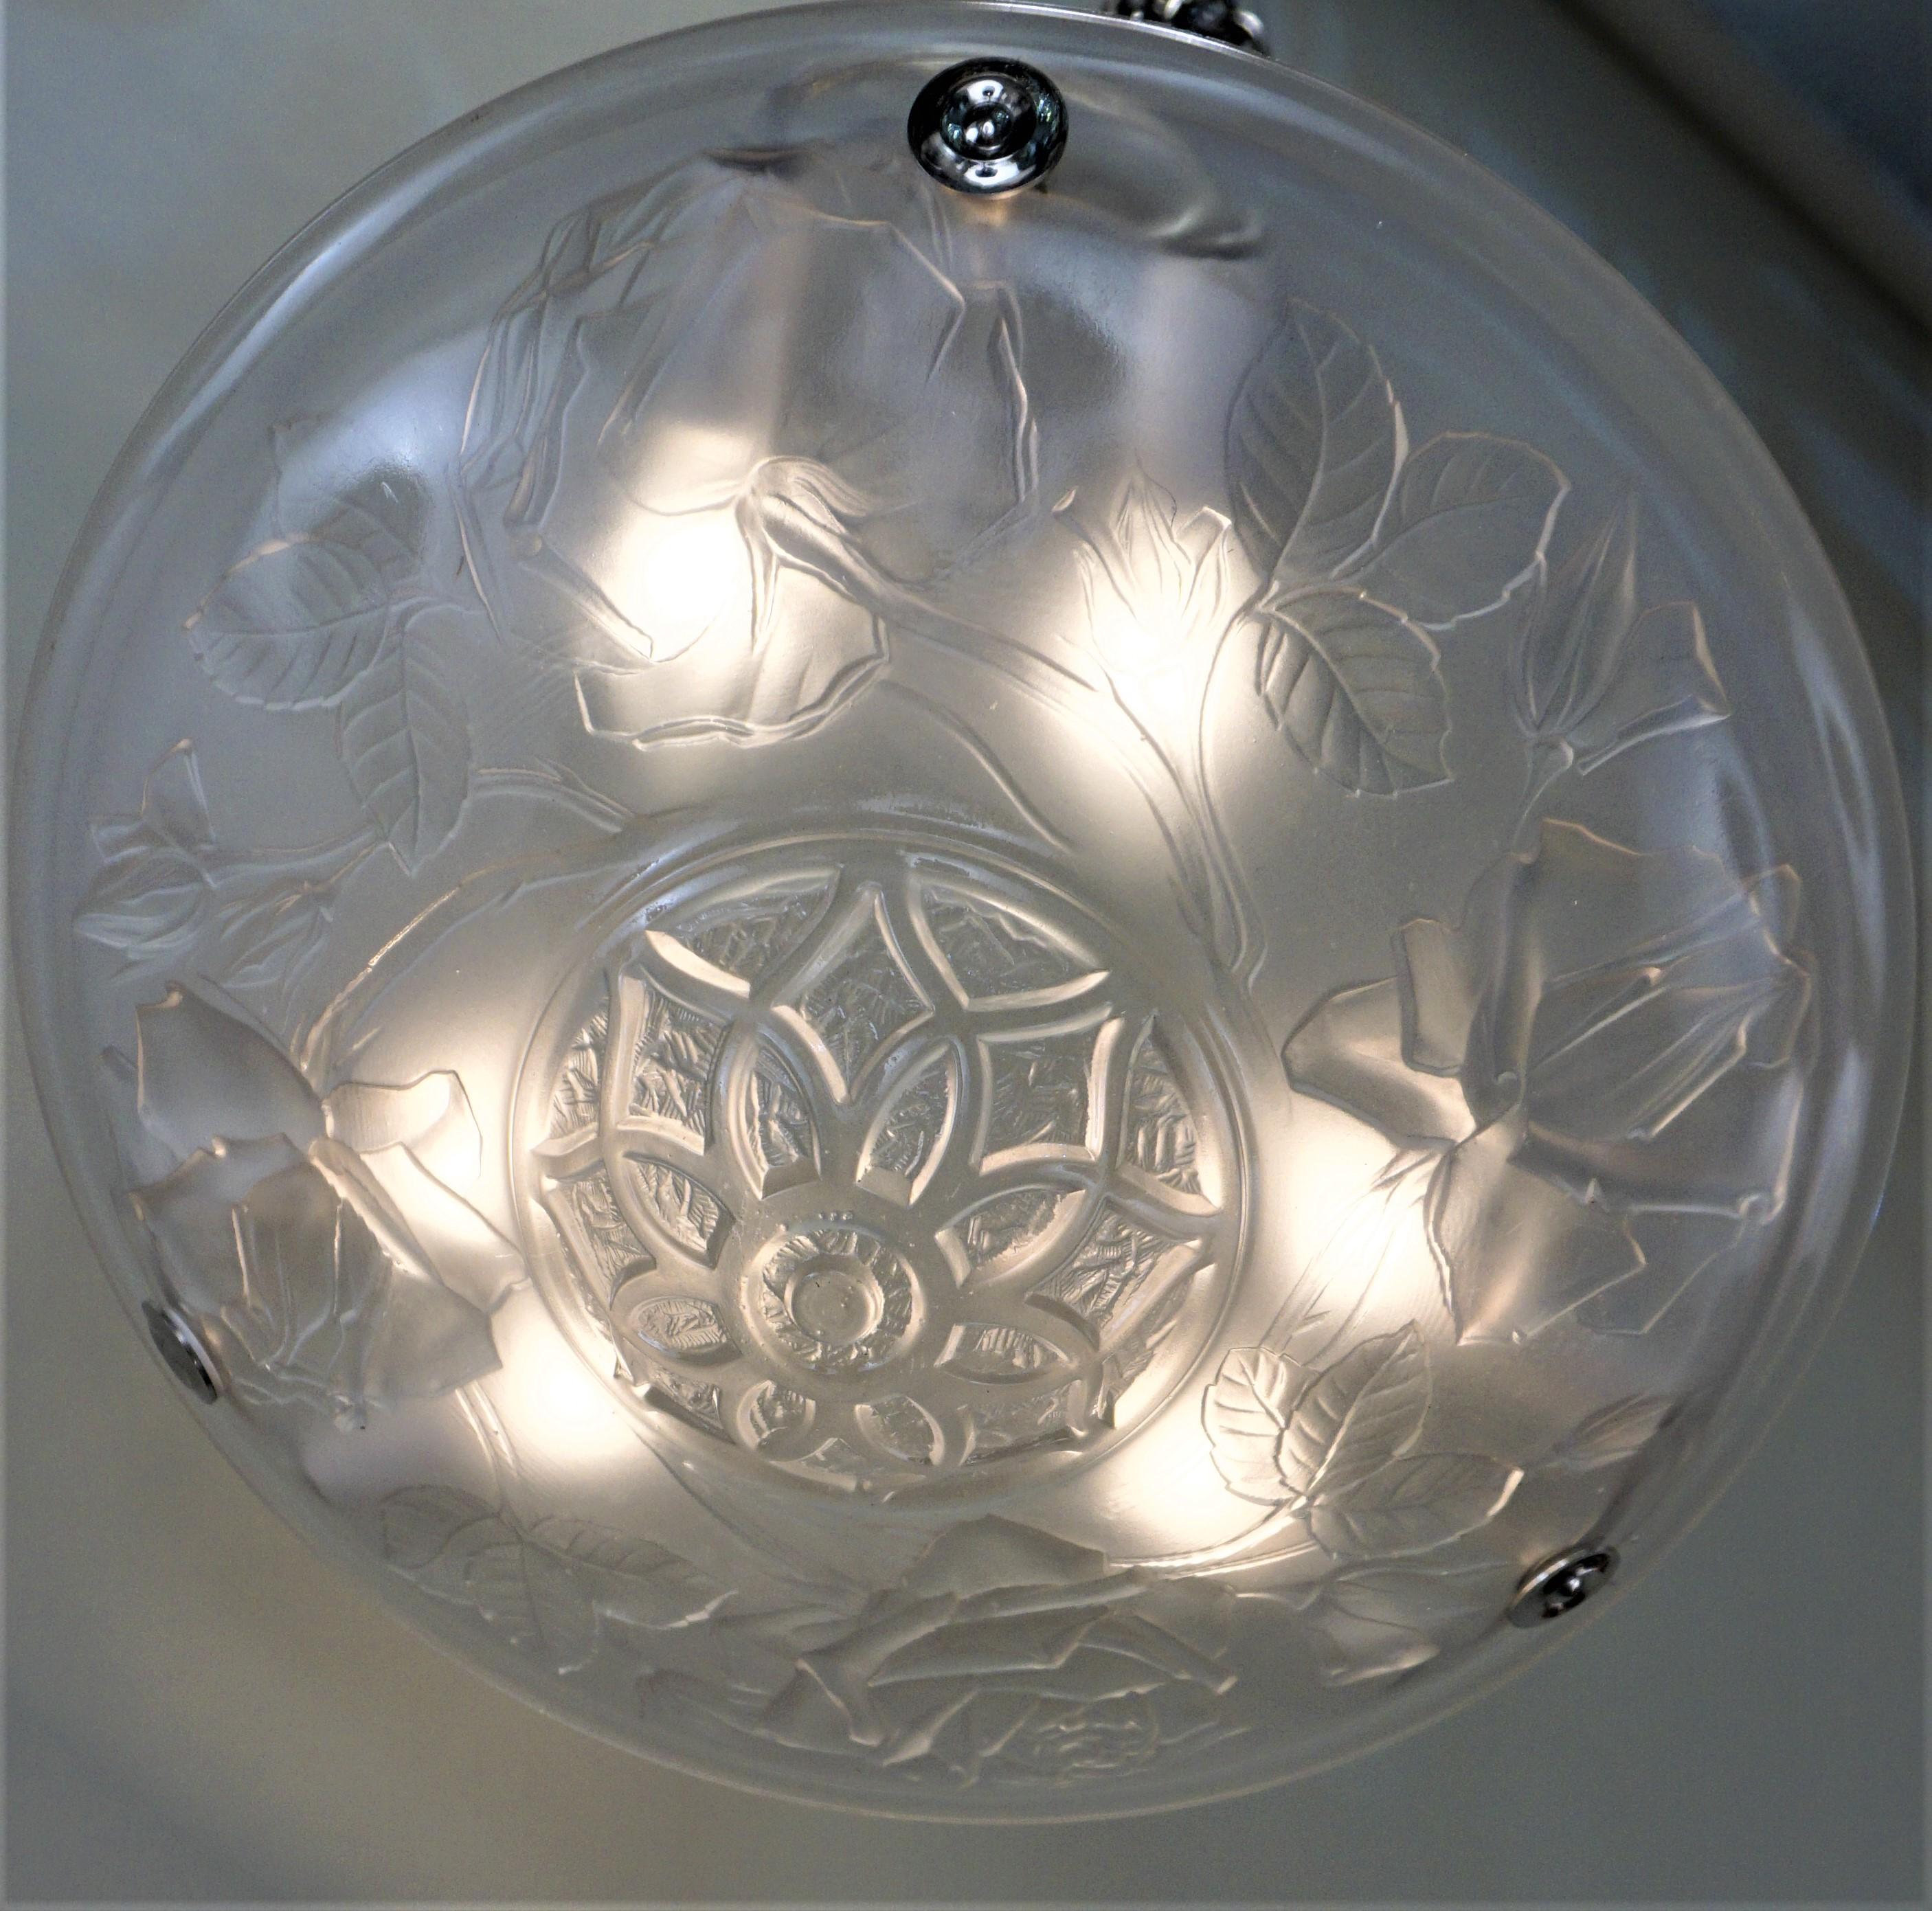 Clear frost glass with nickel on bronze hardware French Art Deco chandelier.
Total of 6 lights 60 watt max each.